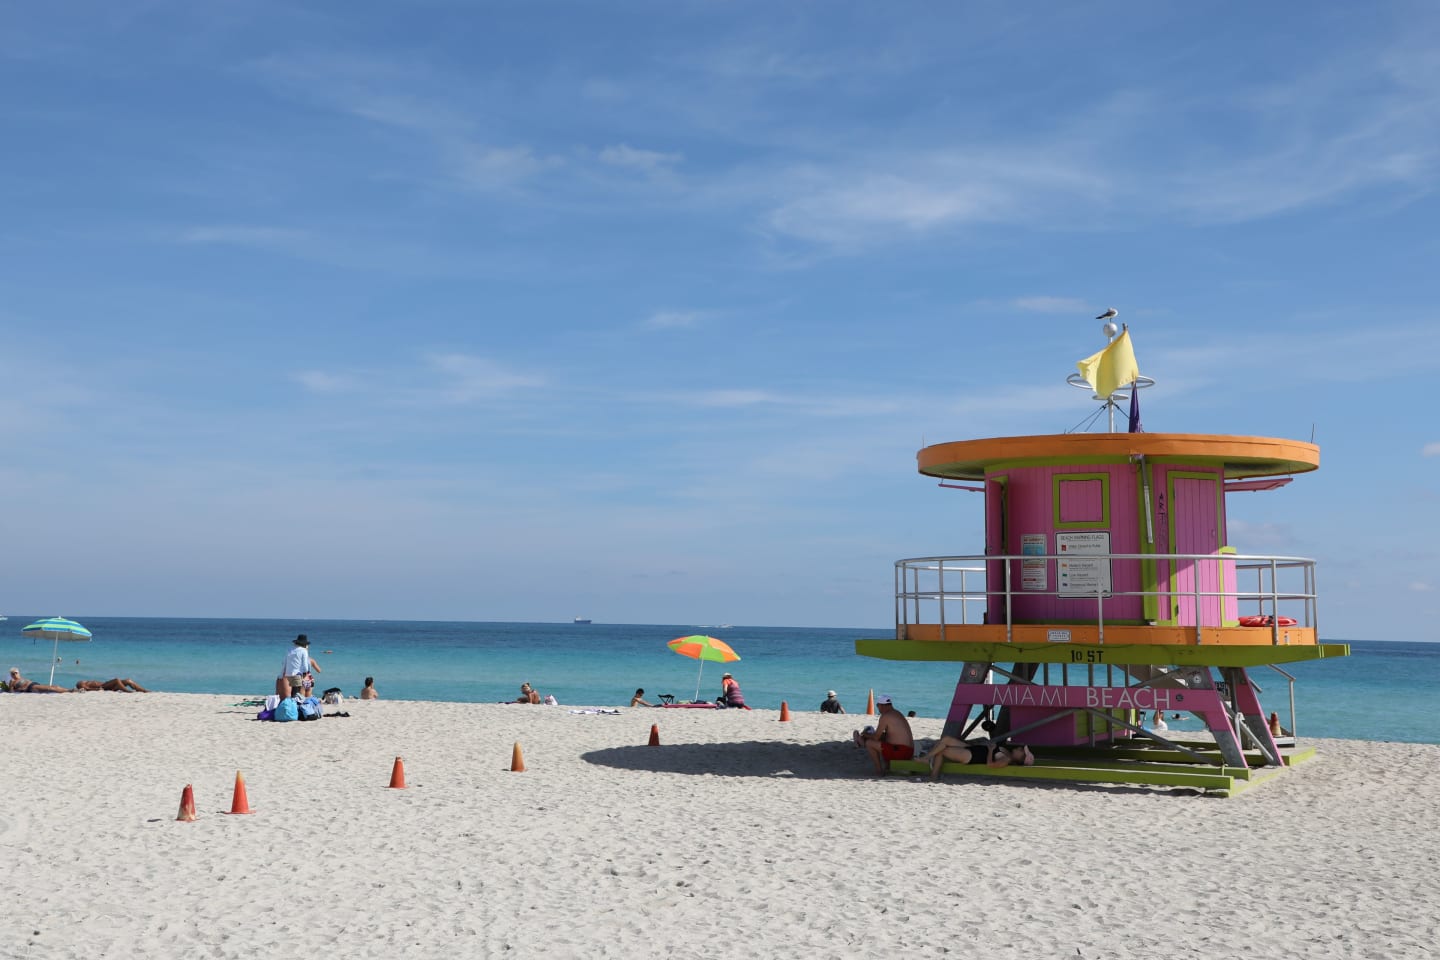 People sit in the shade of a lifeguard tower on the beach in the Art Deco Historic District in